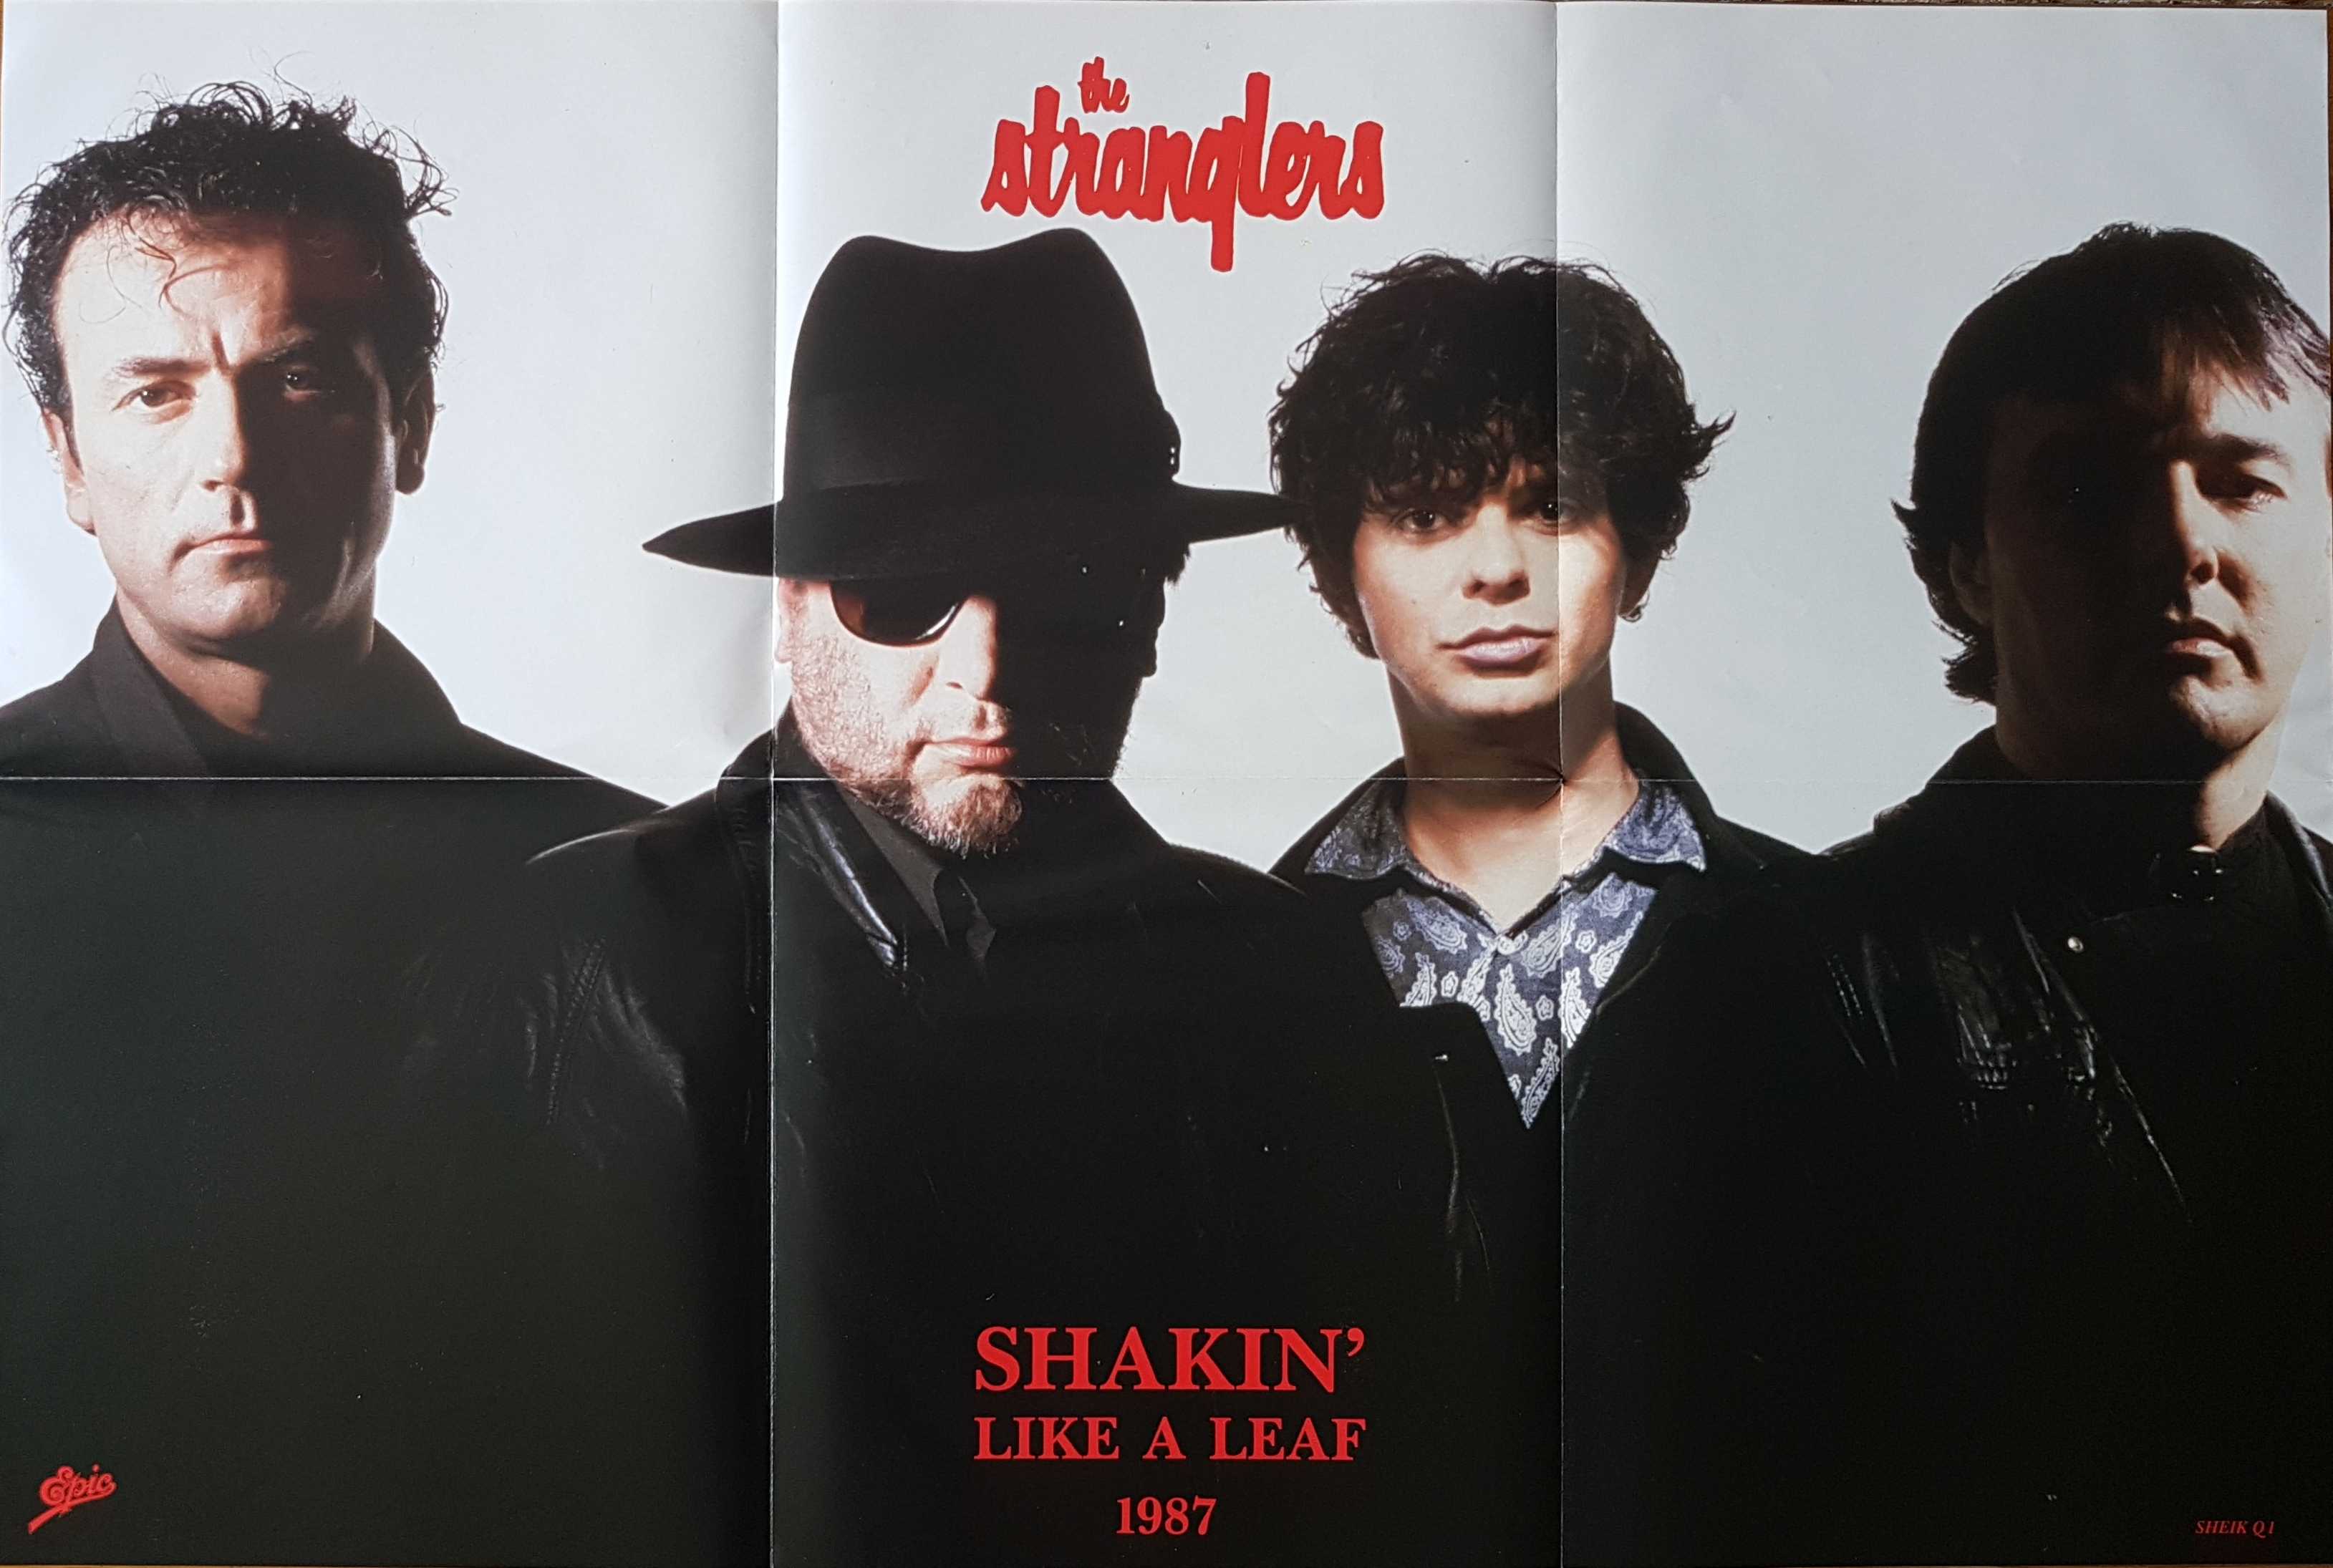 Picture of Shakin' like a leaf by artist The Stranglers  from The Stranglers posters